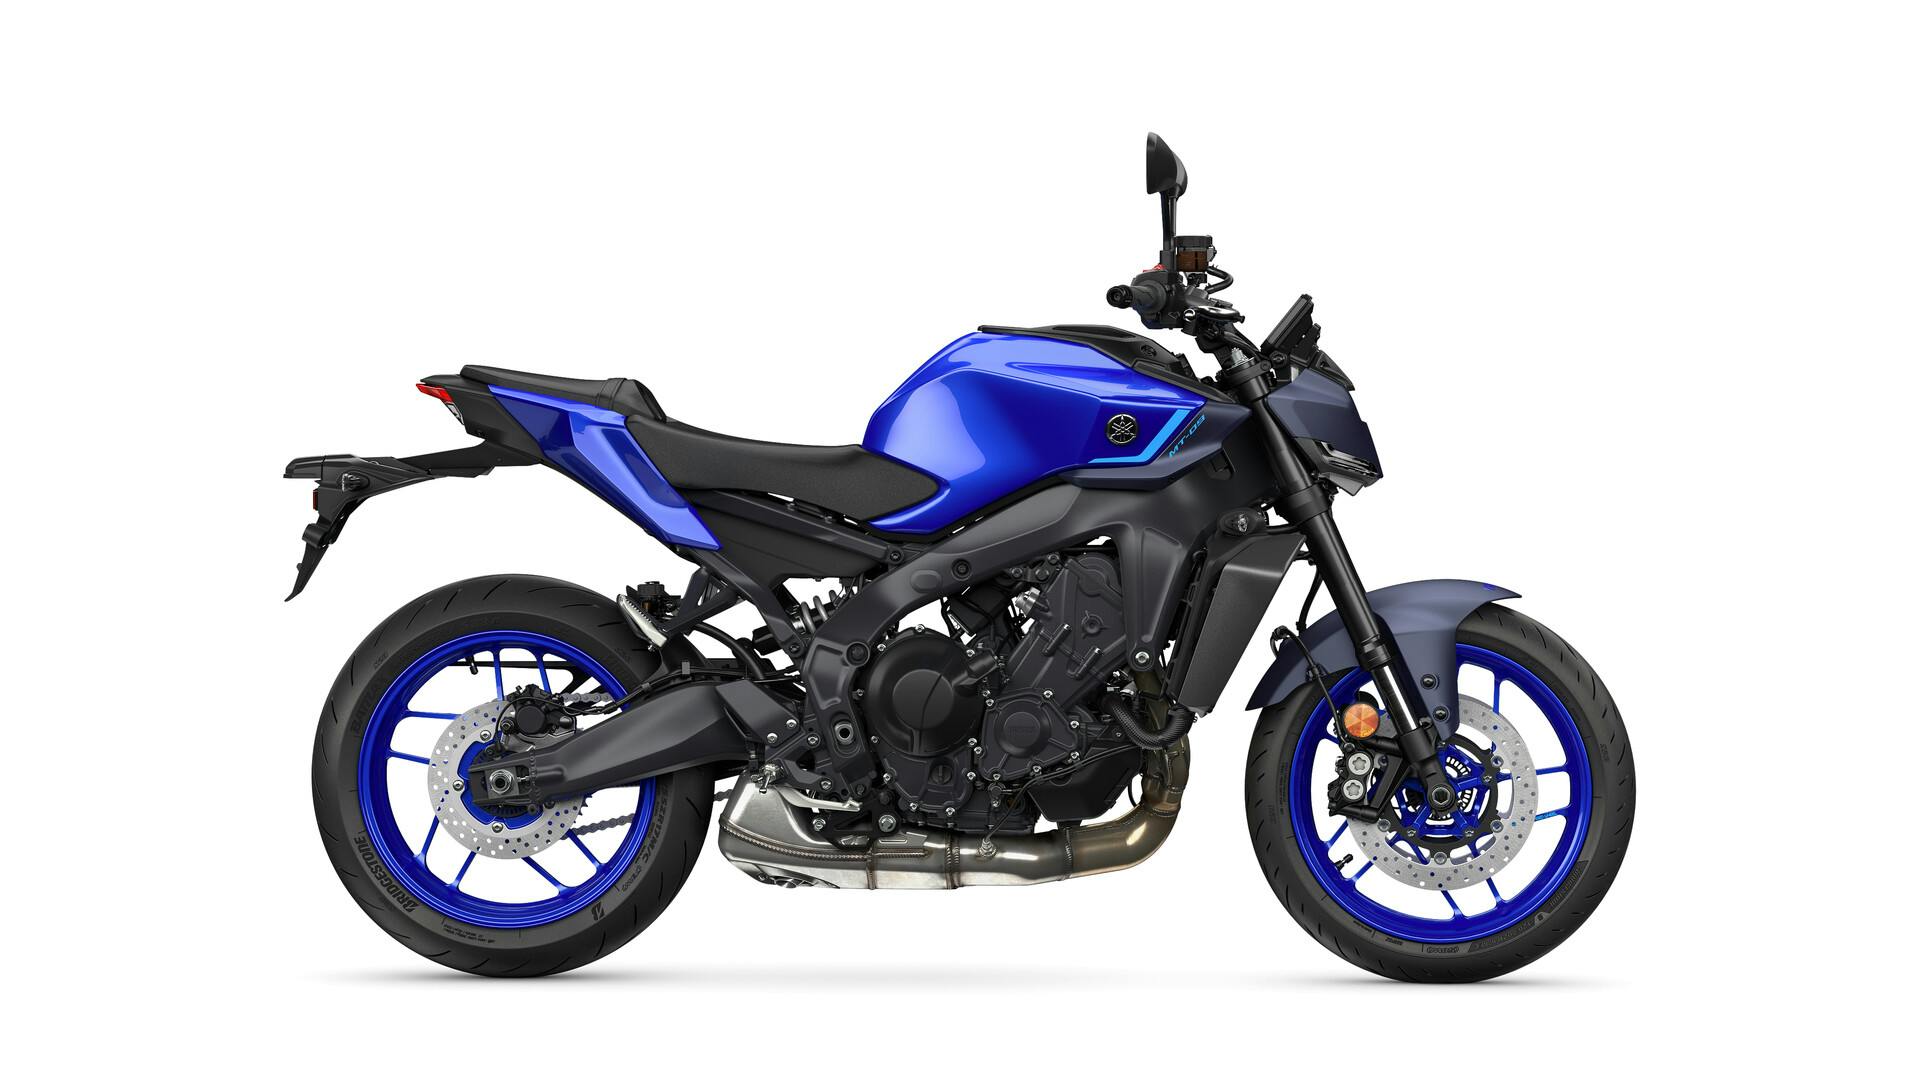 Yamaha MT-09 in icon blue colour